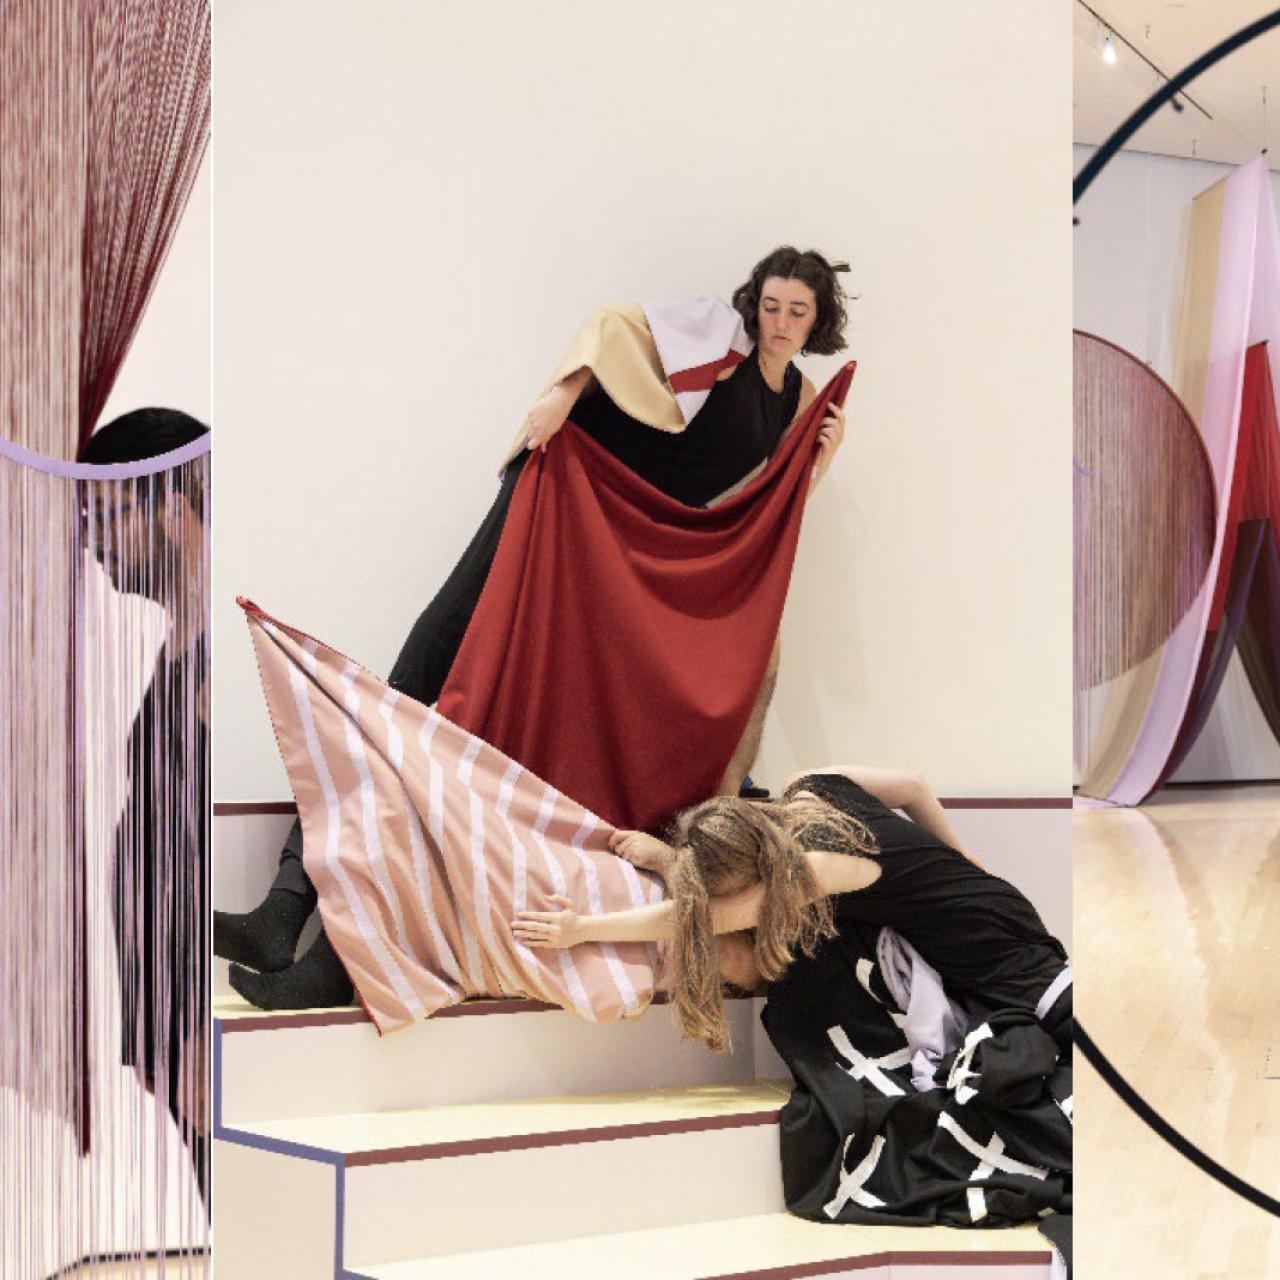 3 shots of performers in the Andrea Canepa exhibition